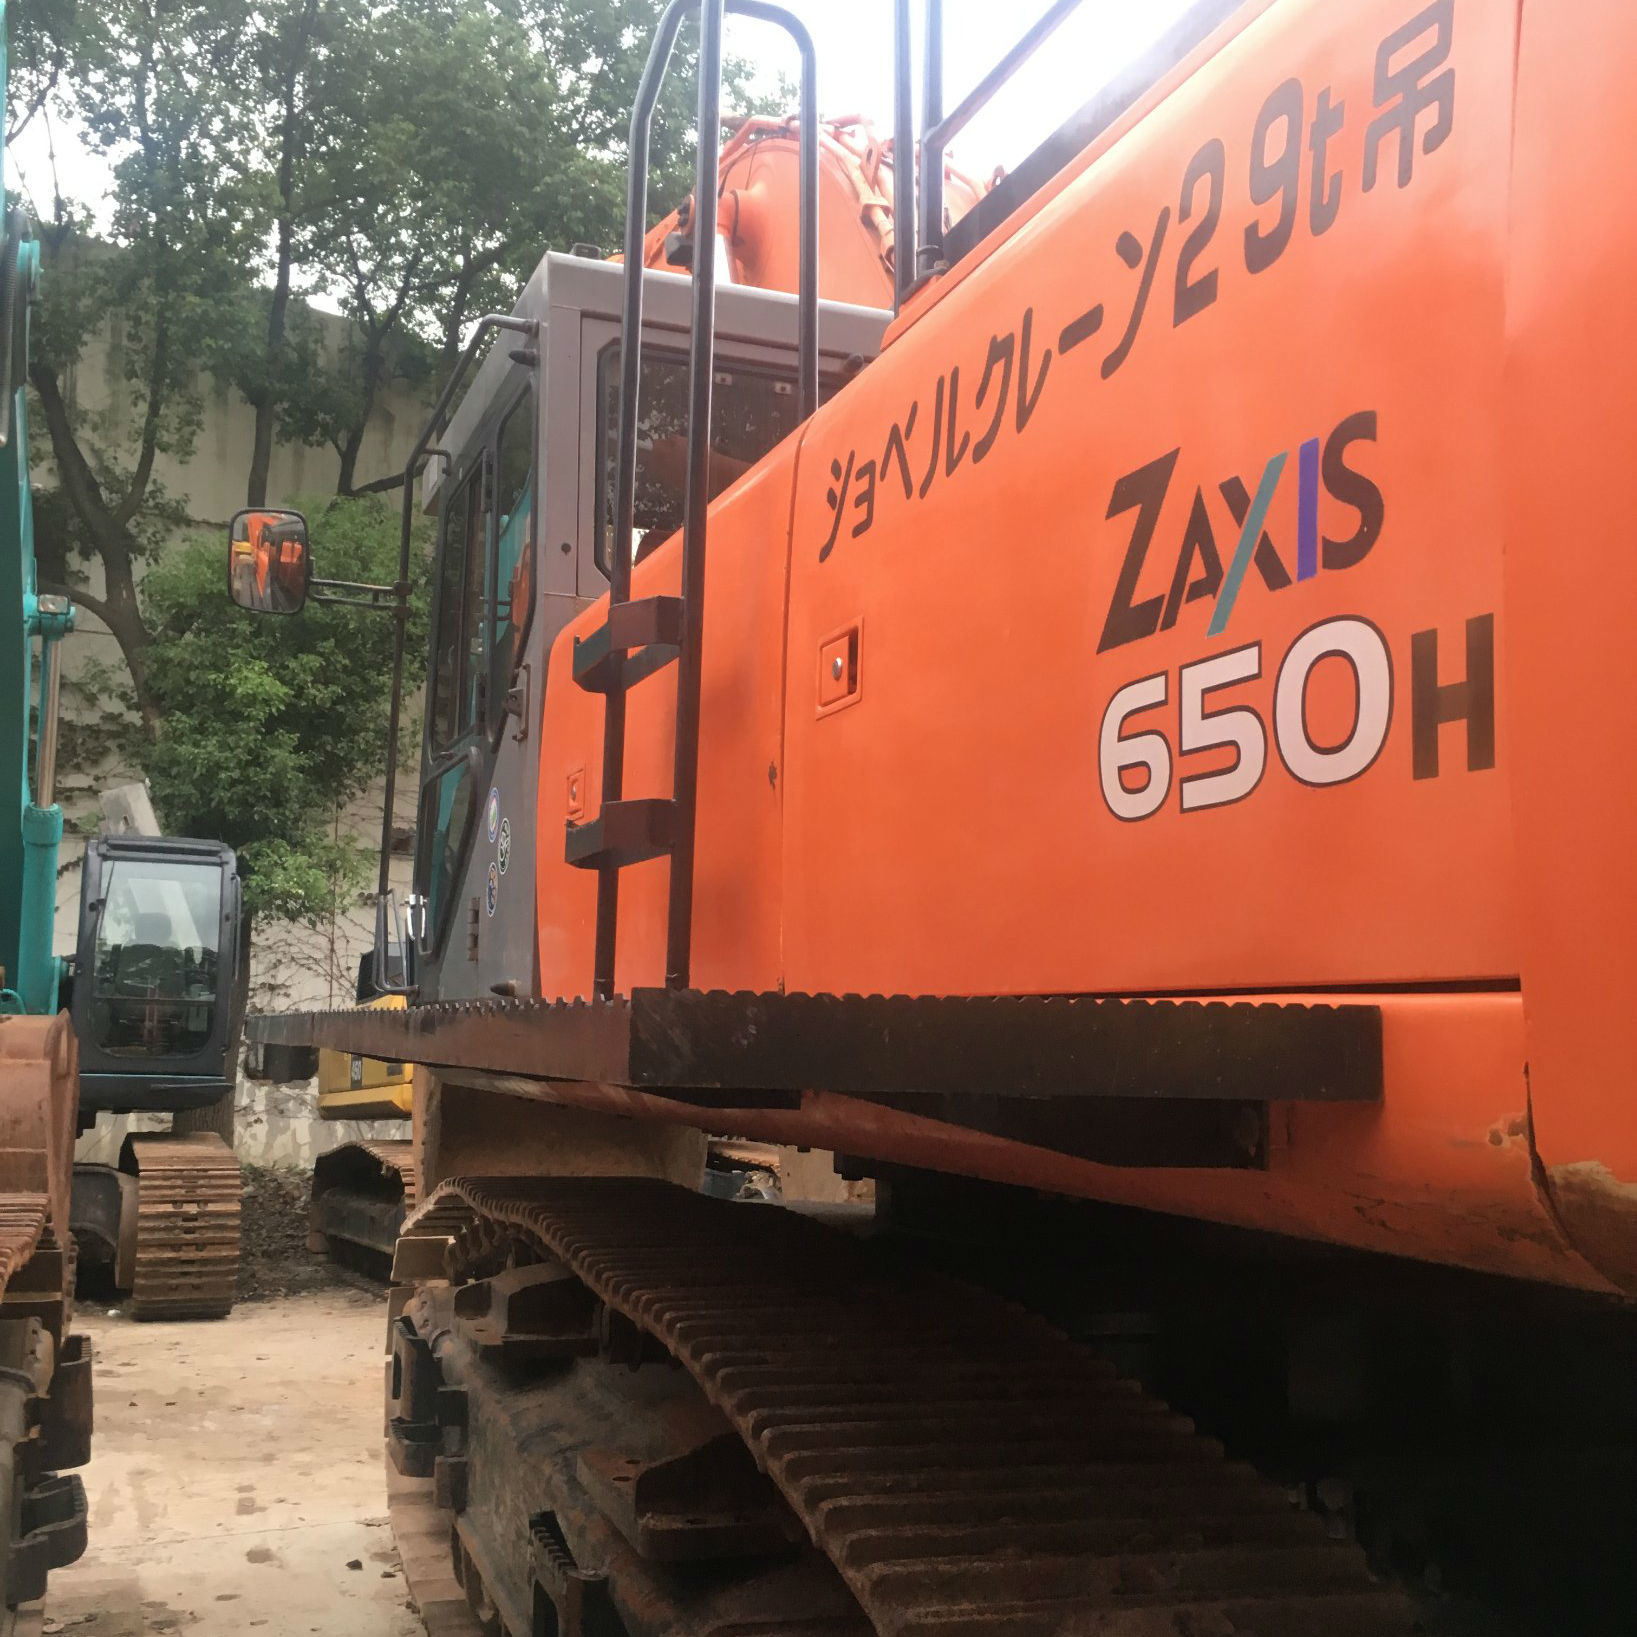 Used Huge Hitachi Zx 650 Excavator in Good Condition